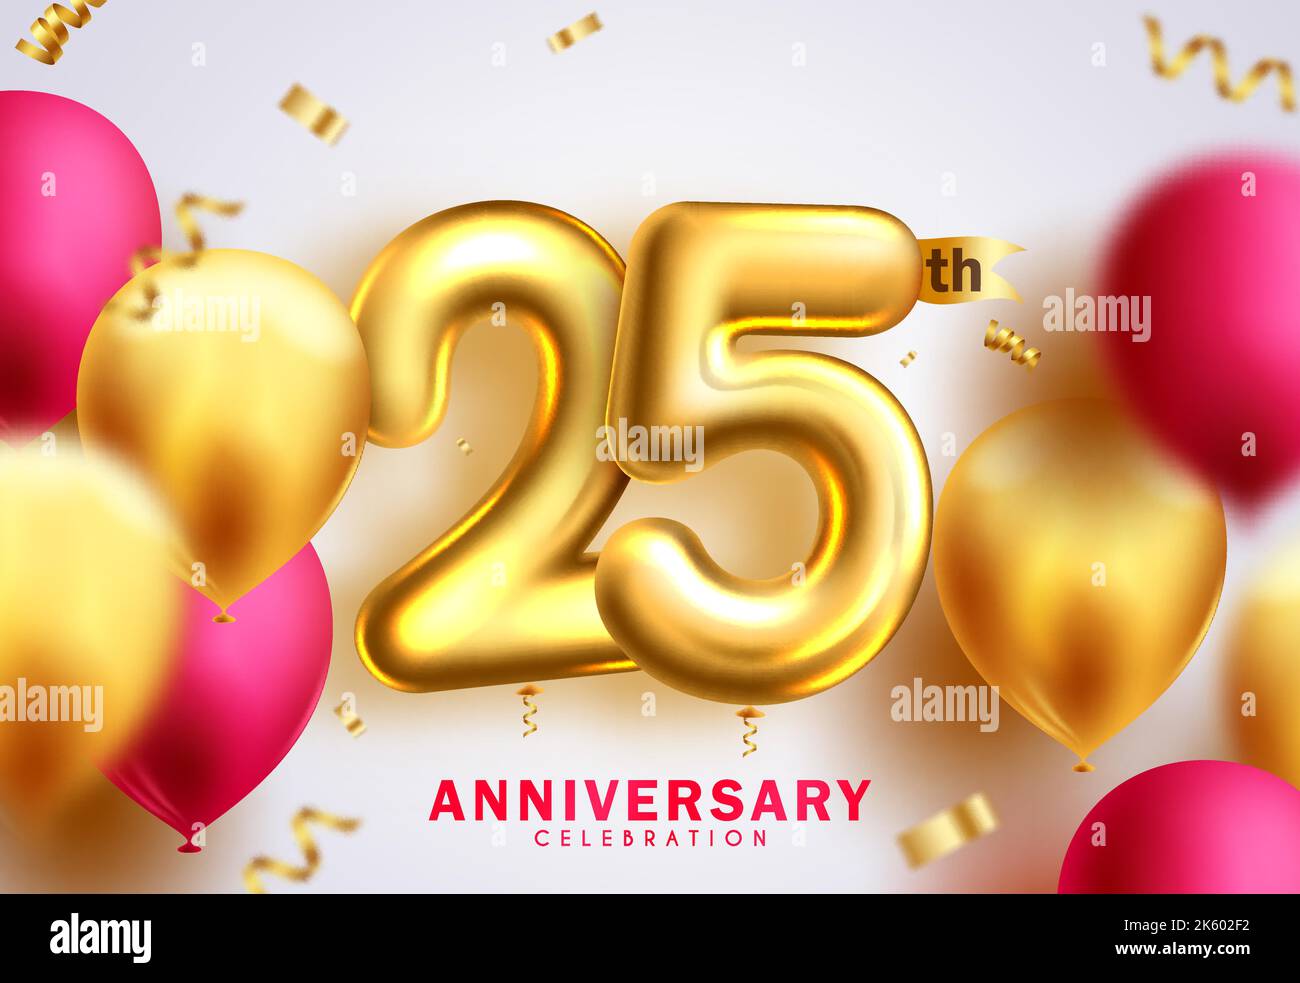 25th anniversary vector background design. Twenty fifth silver anniversary celebration with 25 number balloon elements for greeting card decoration. Stock Vector